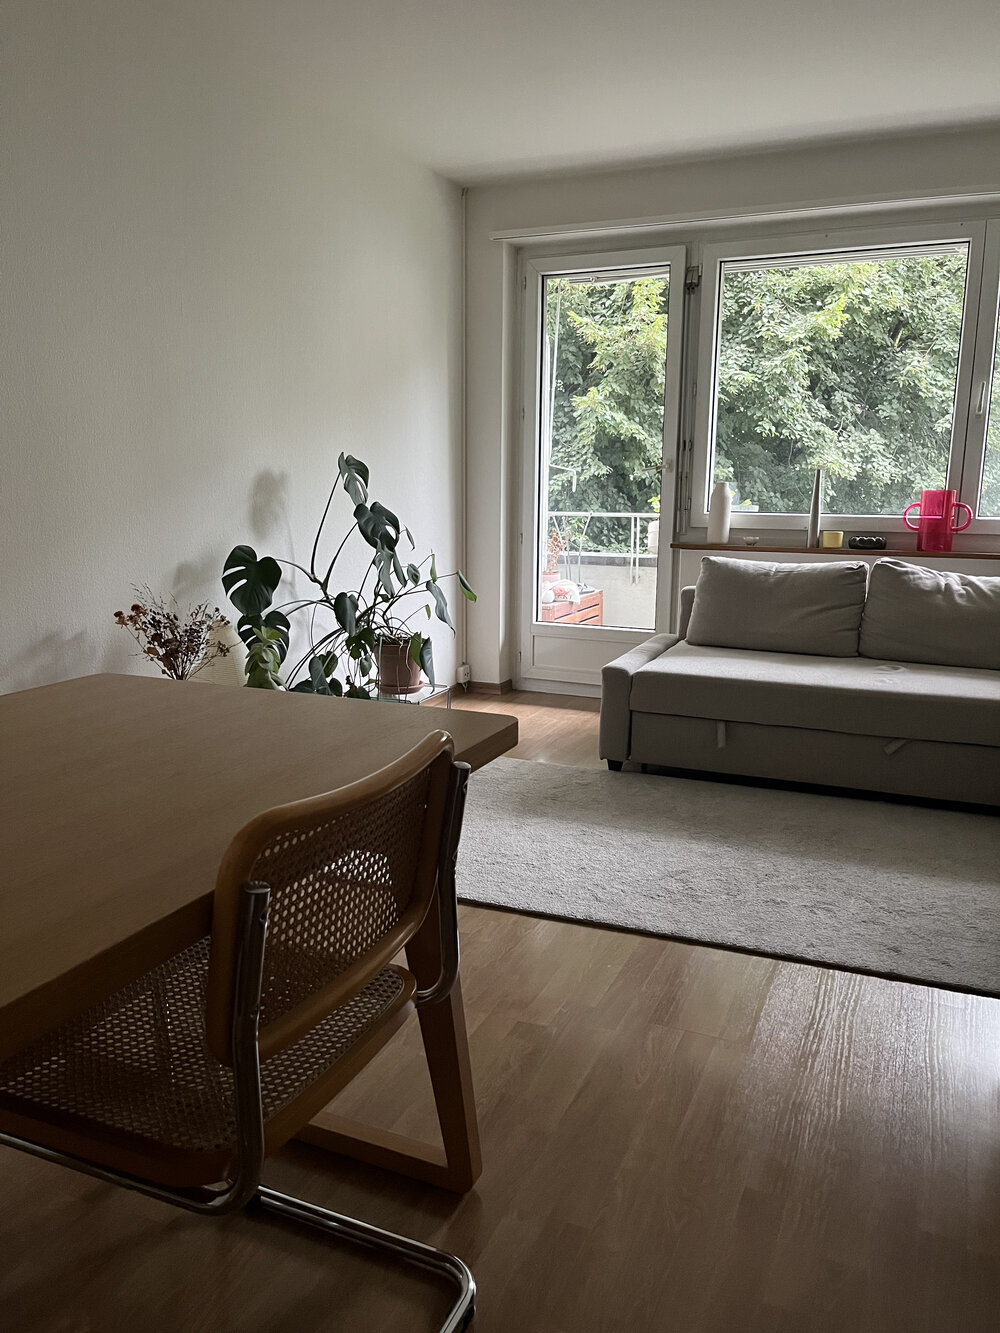 Furnished flat to sublet in August